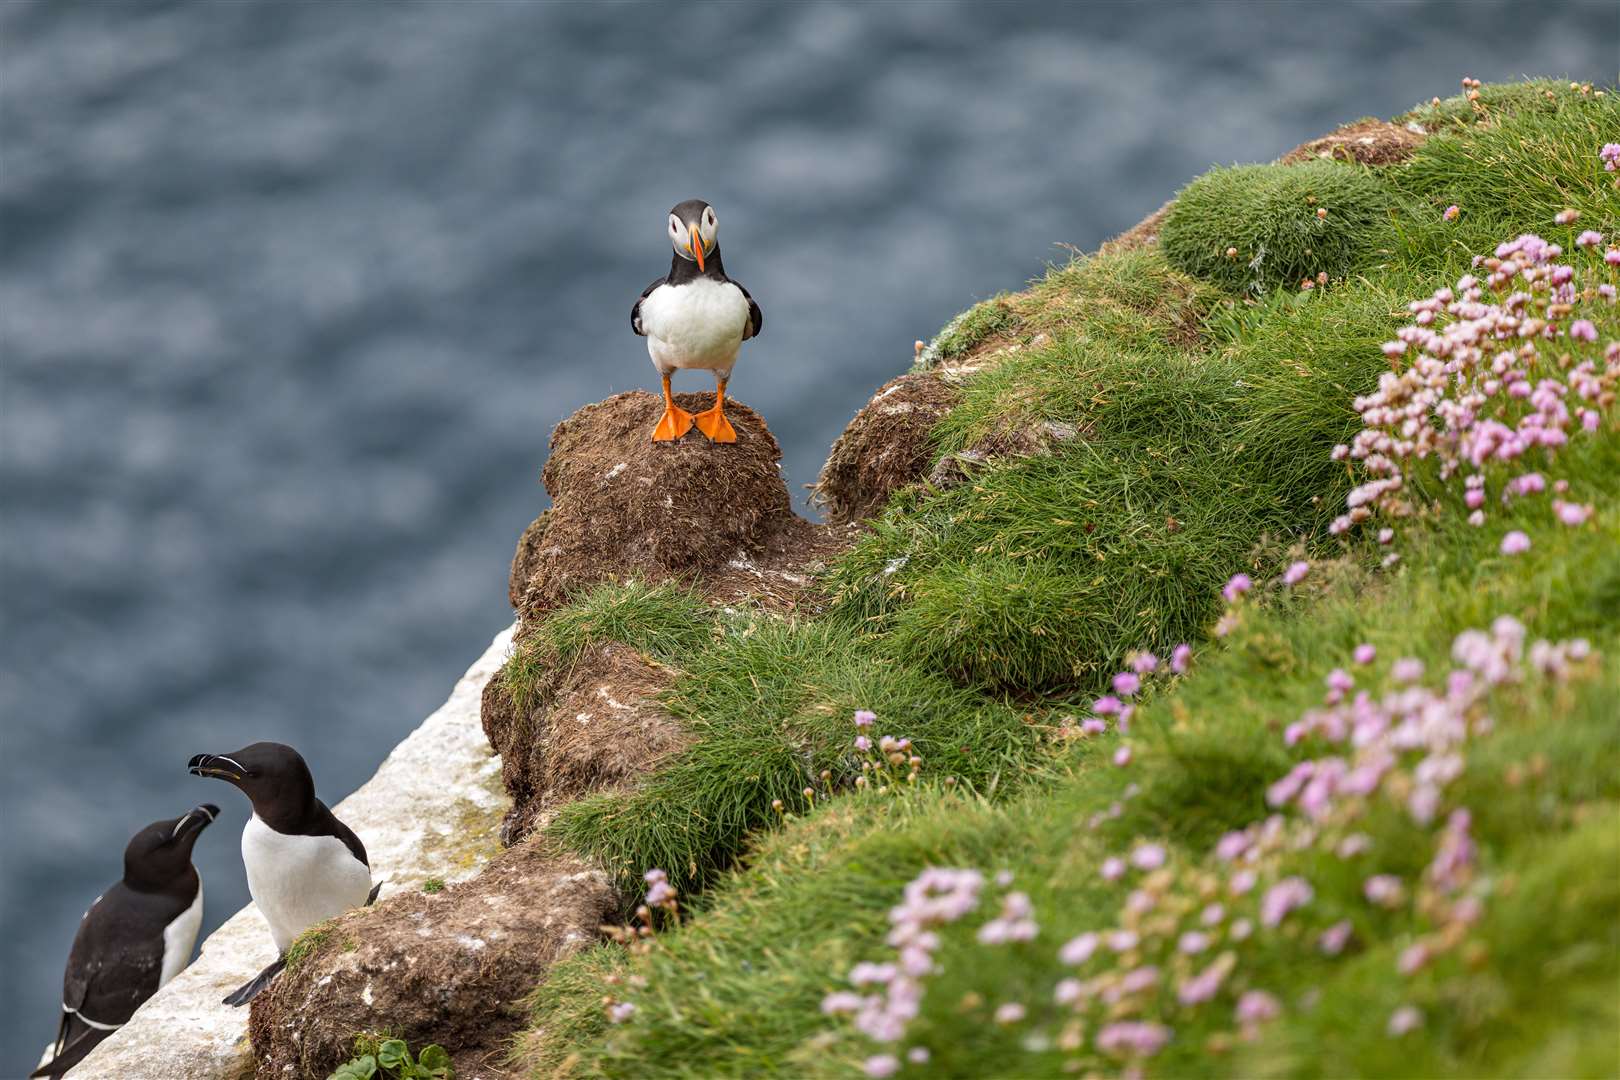 Puffins have made a home at Drum Hollistan.